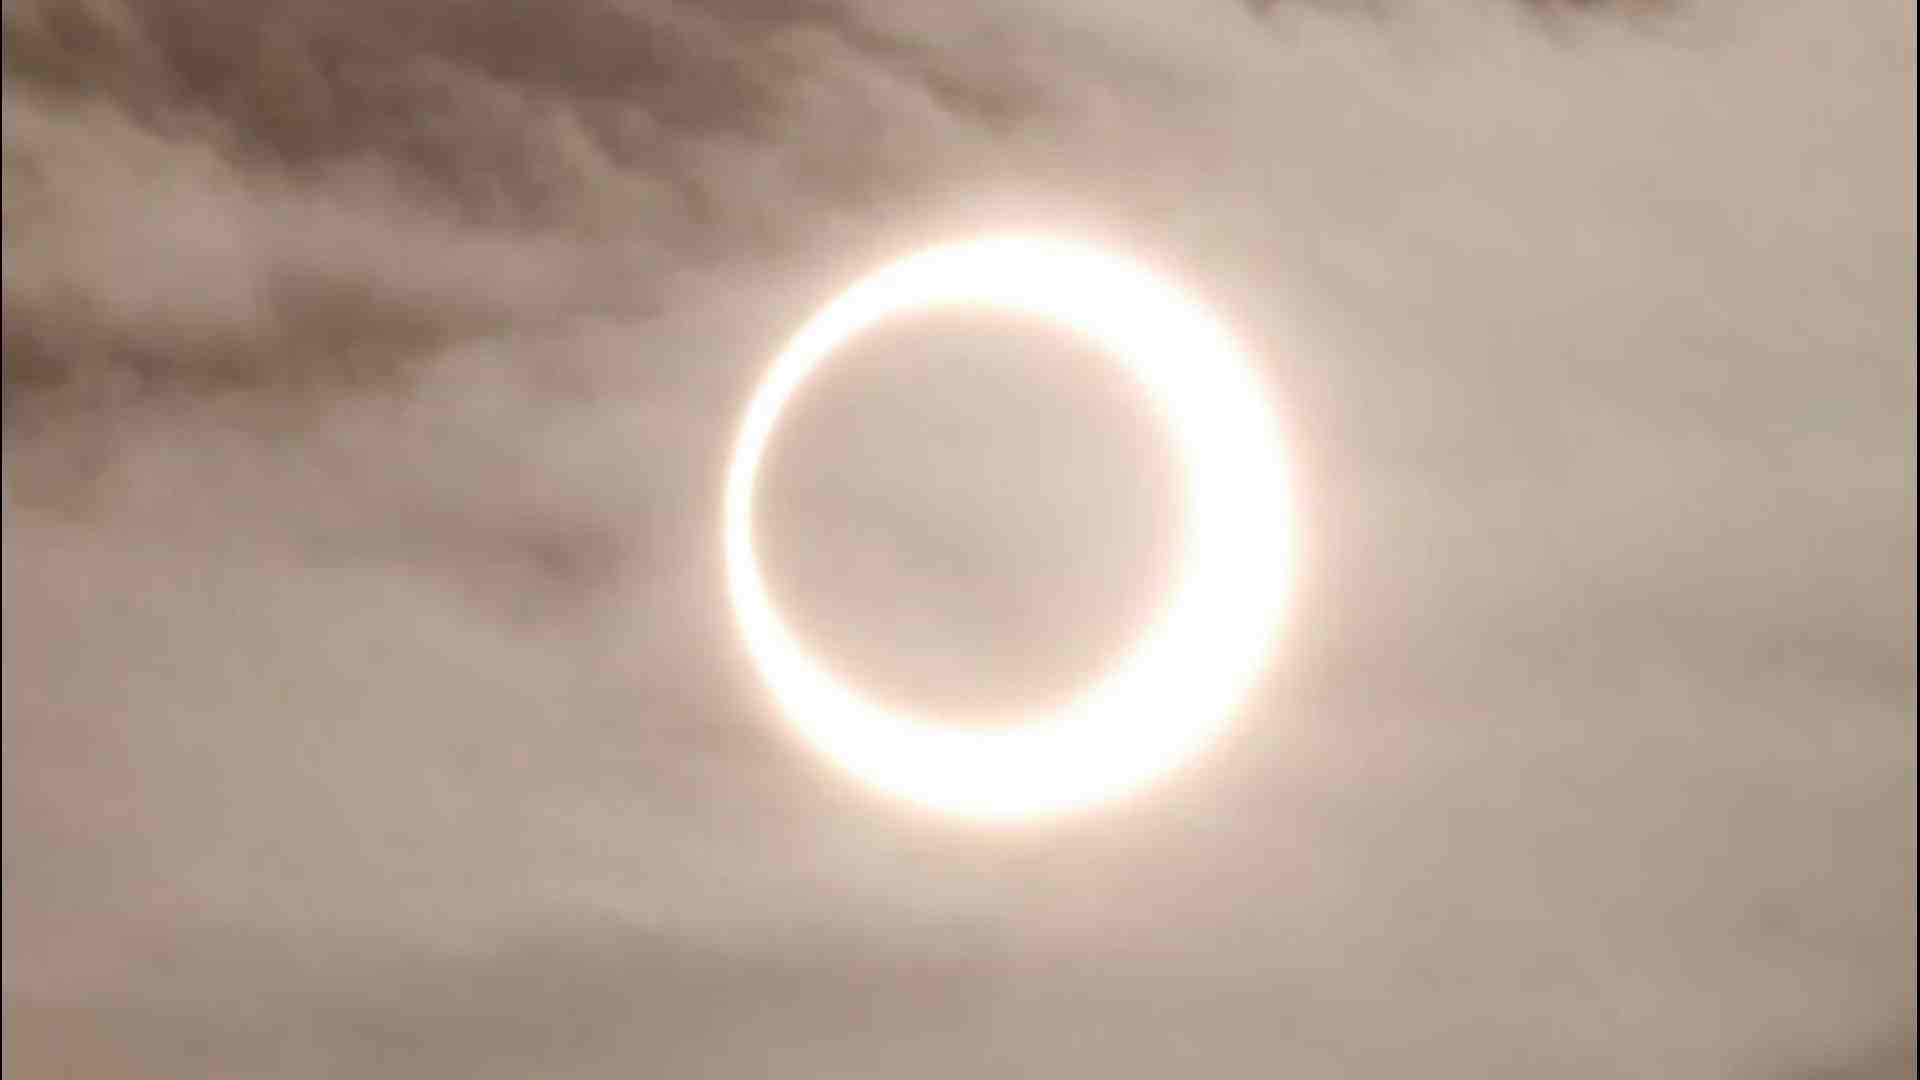 What Time is the eclipse today in California 2020?